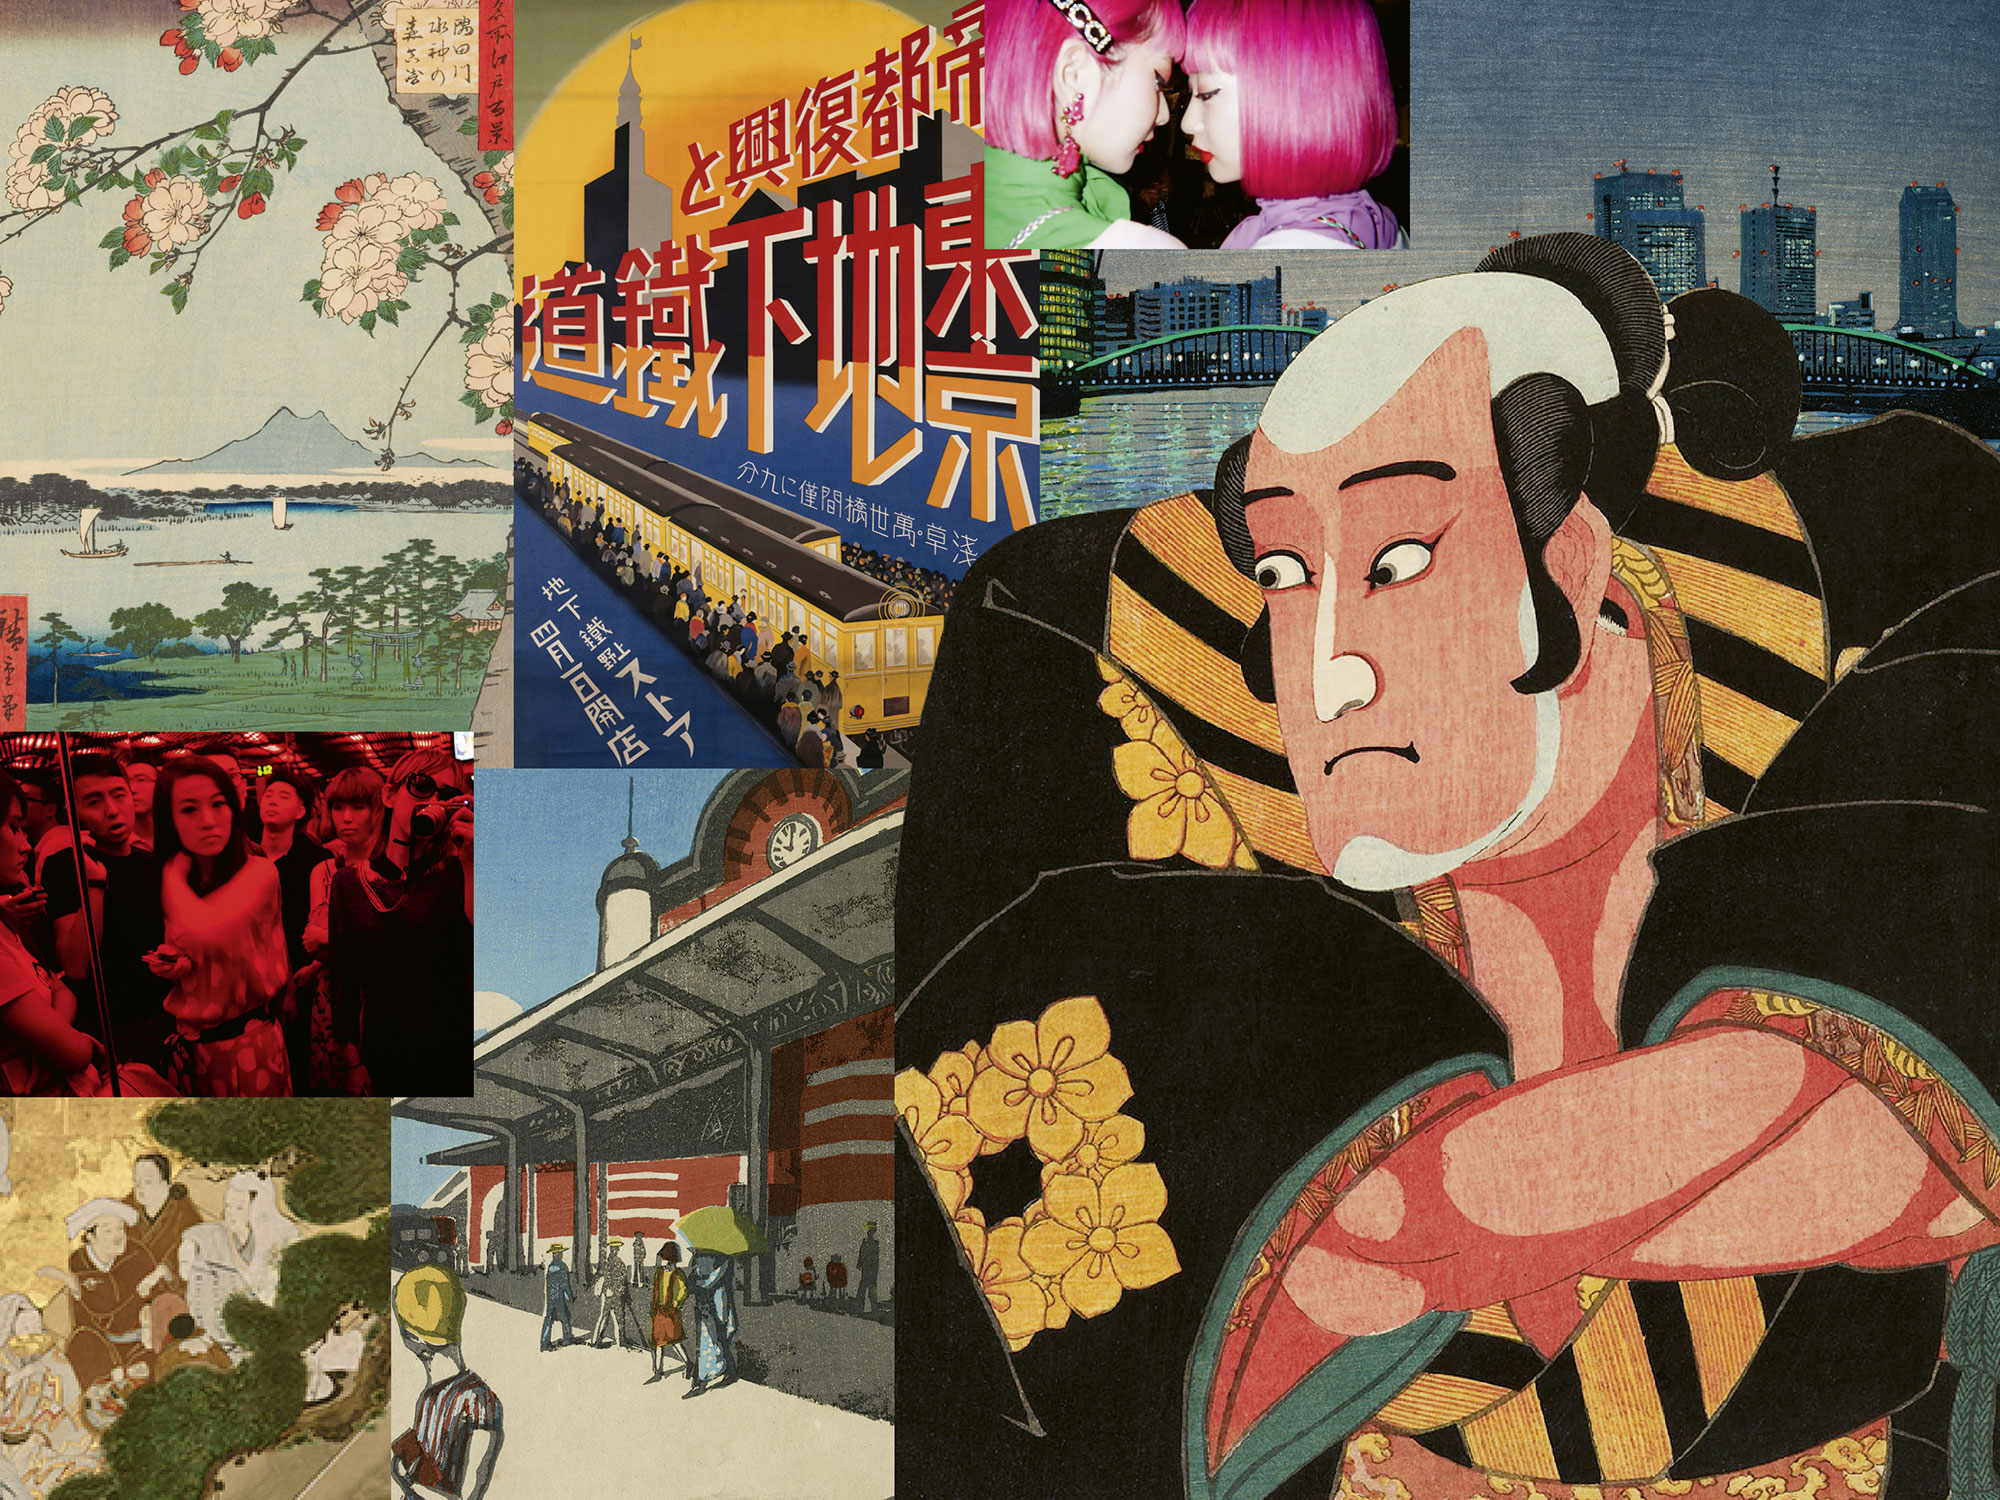 Exhibition on Screen – Tokyo Stories